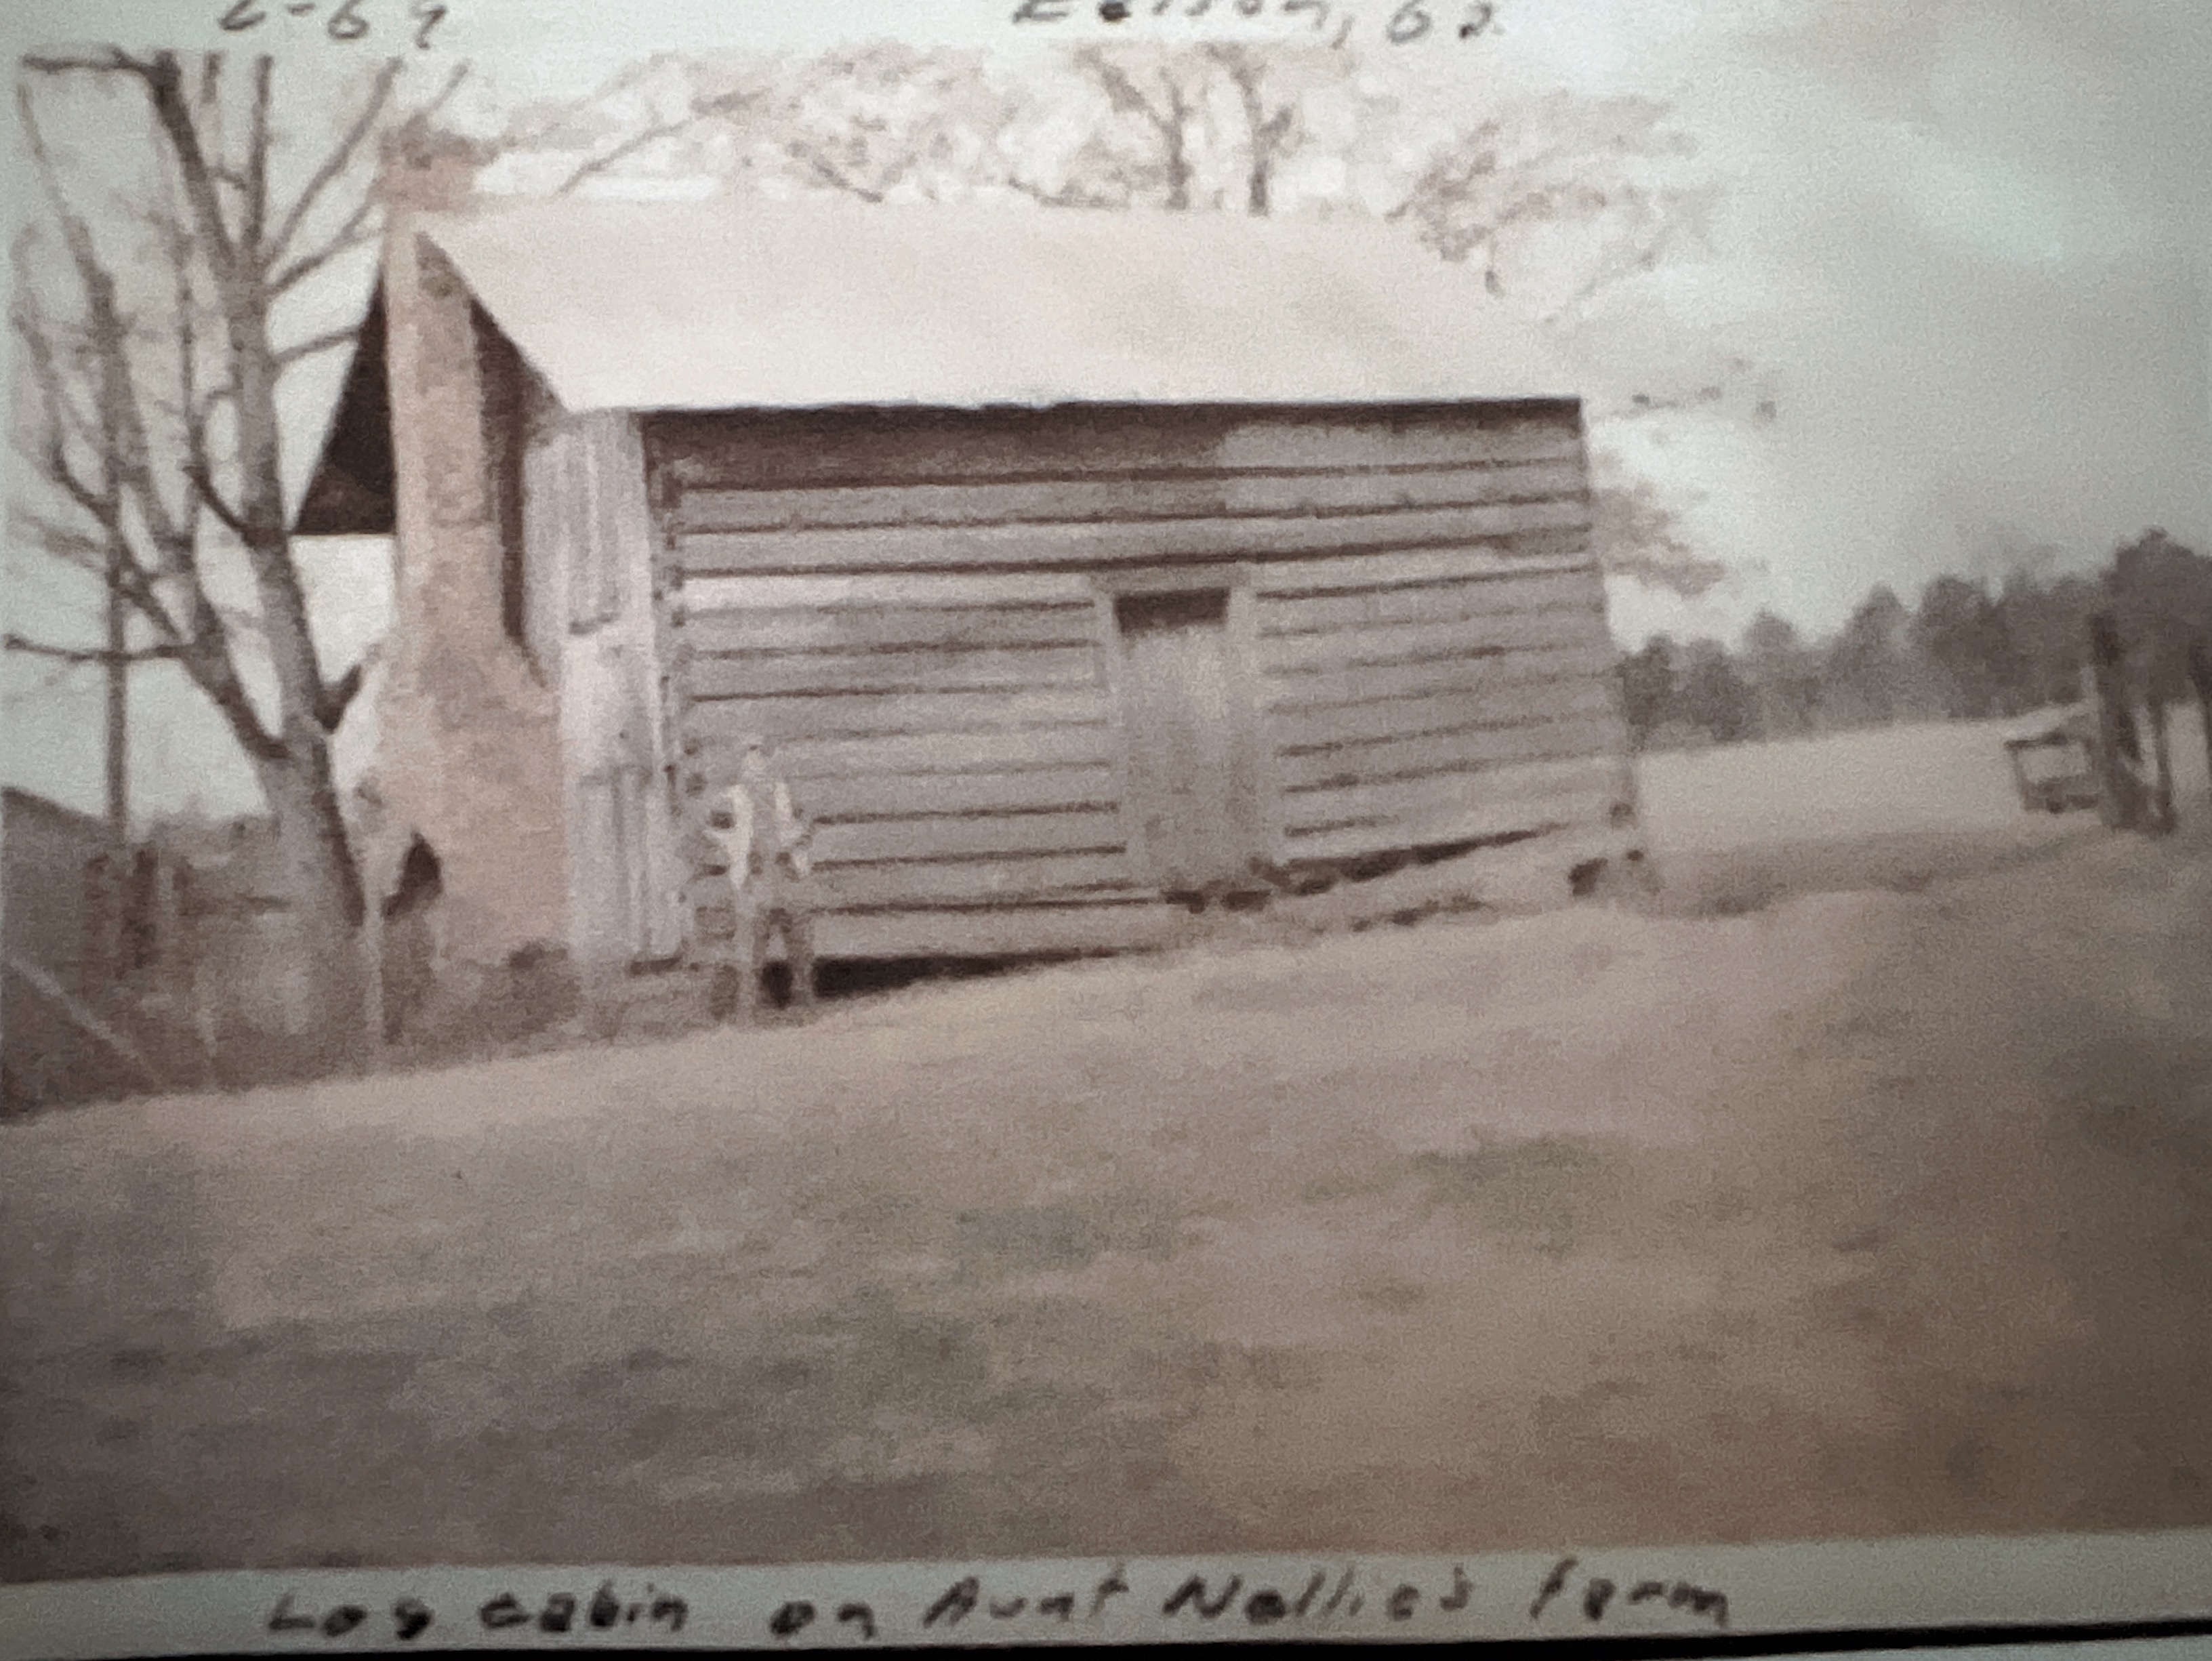 Cabin built by the Thomas Todd Family about 1834.  Dismantled January. 1993. The property currently owned by David Dozier.